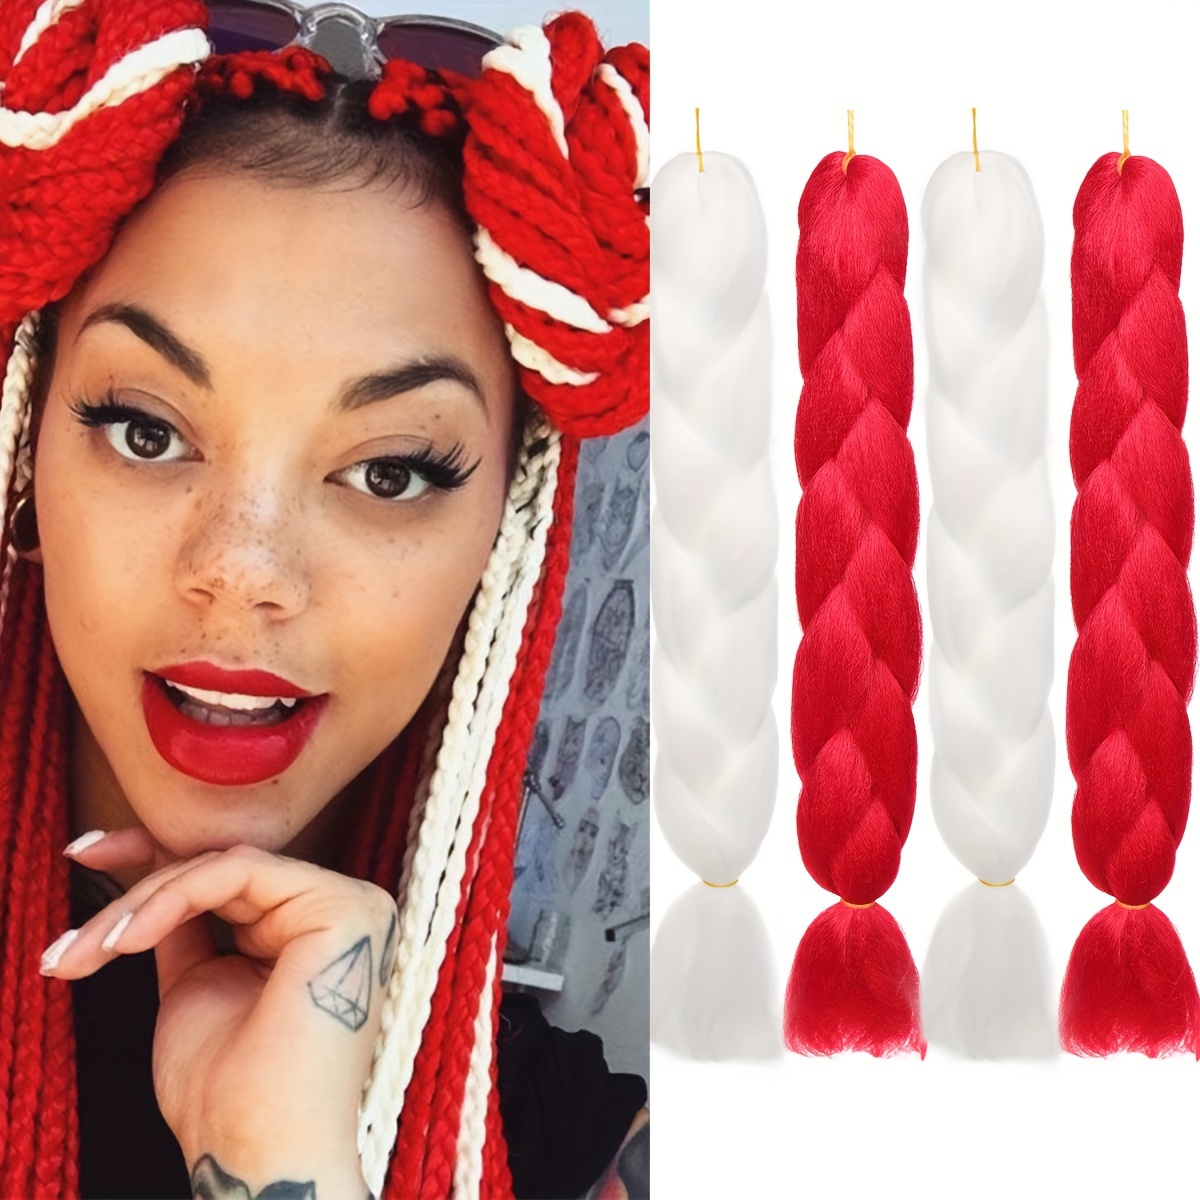 4Pcs 60.96 Cm Jumbo Braid Synthetic Braiding Hair Red Green Black White  Jumbo Hair Extension For Women DIY Braids Suitable For Christmas Party